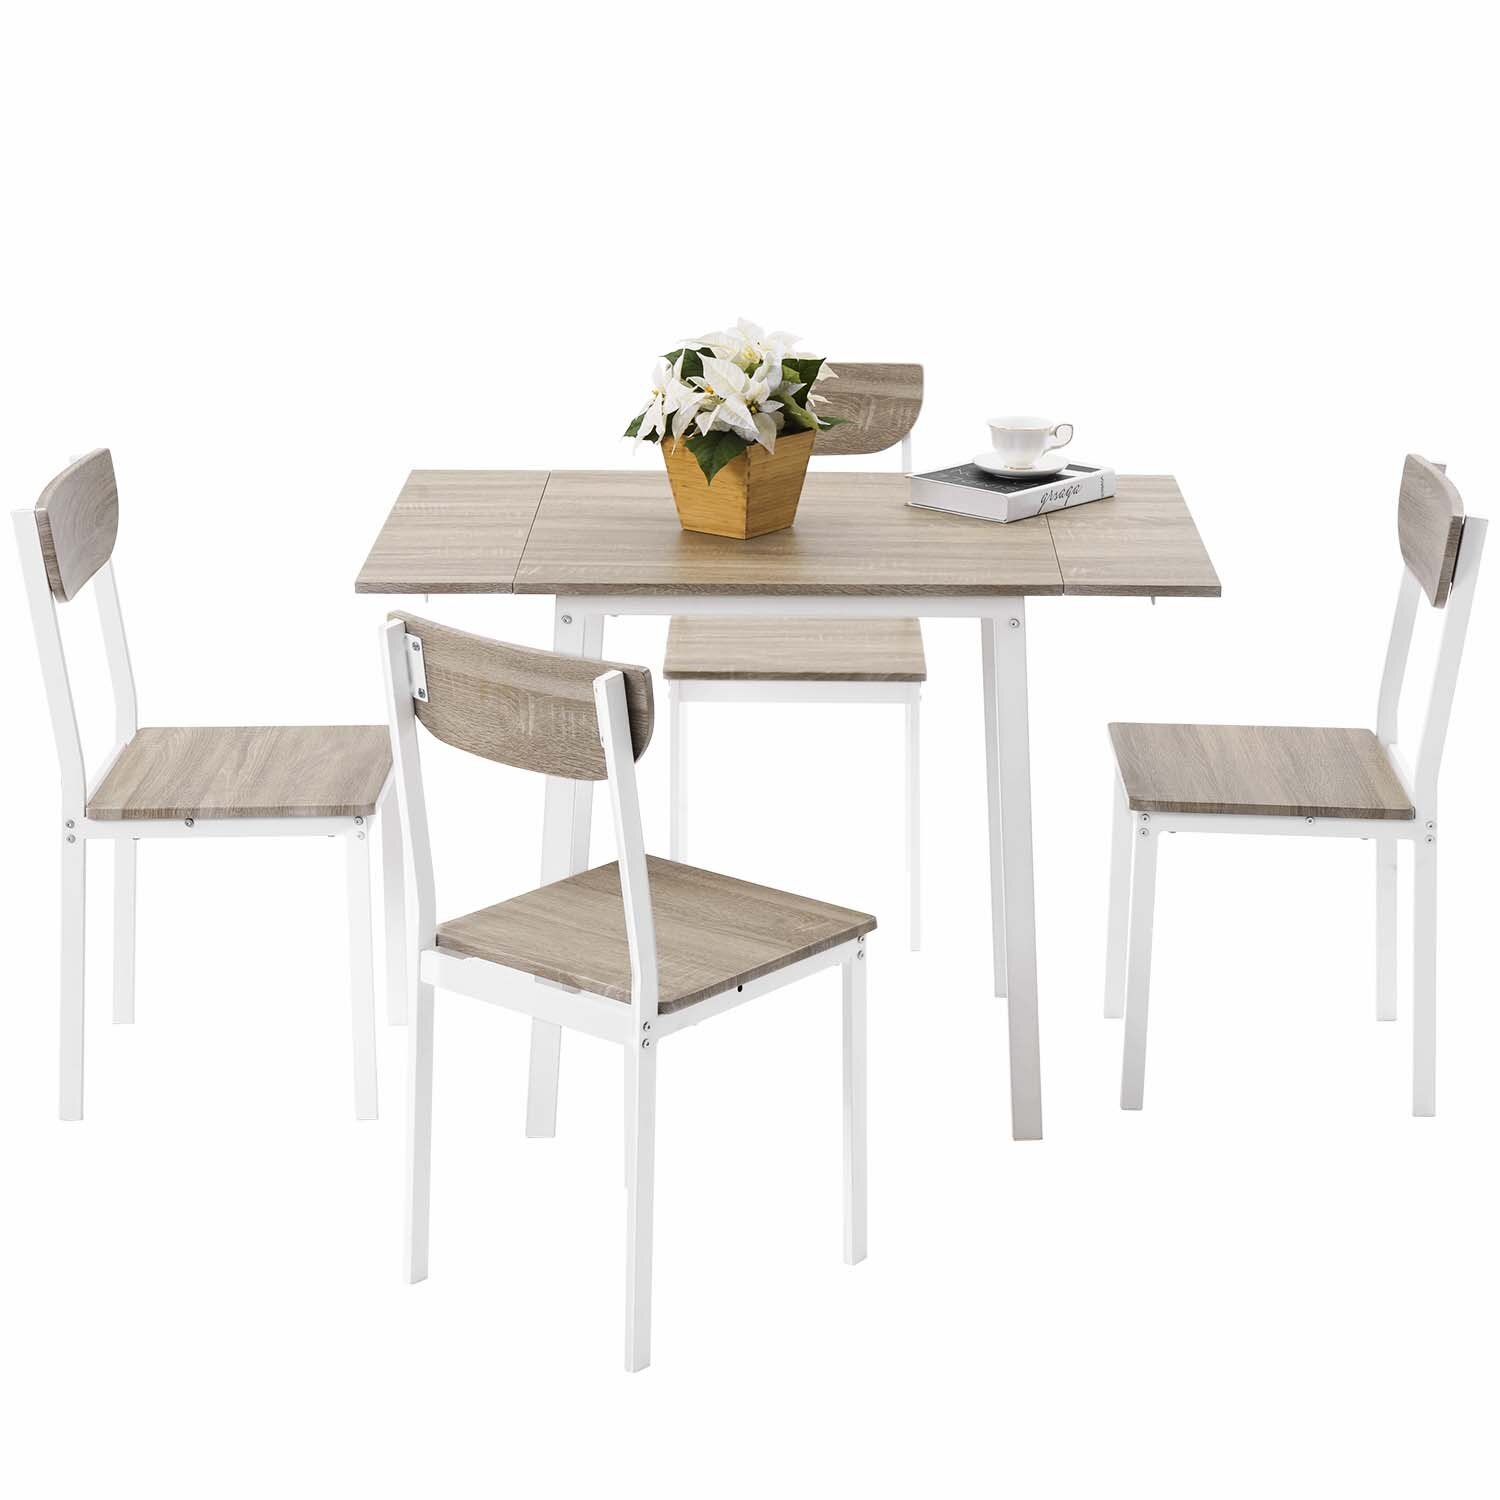 Metal Dining Table And Chairs : Oslo Metal Dining Chair Dining Room